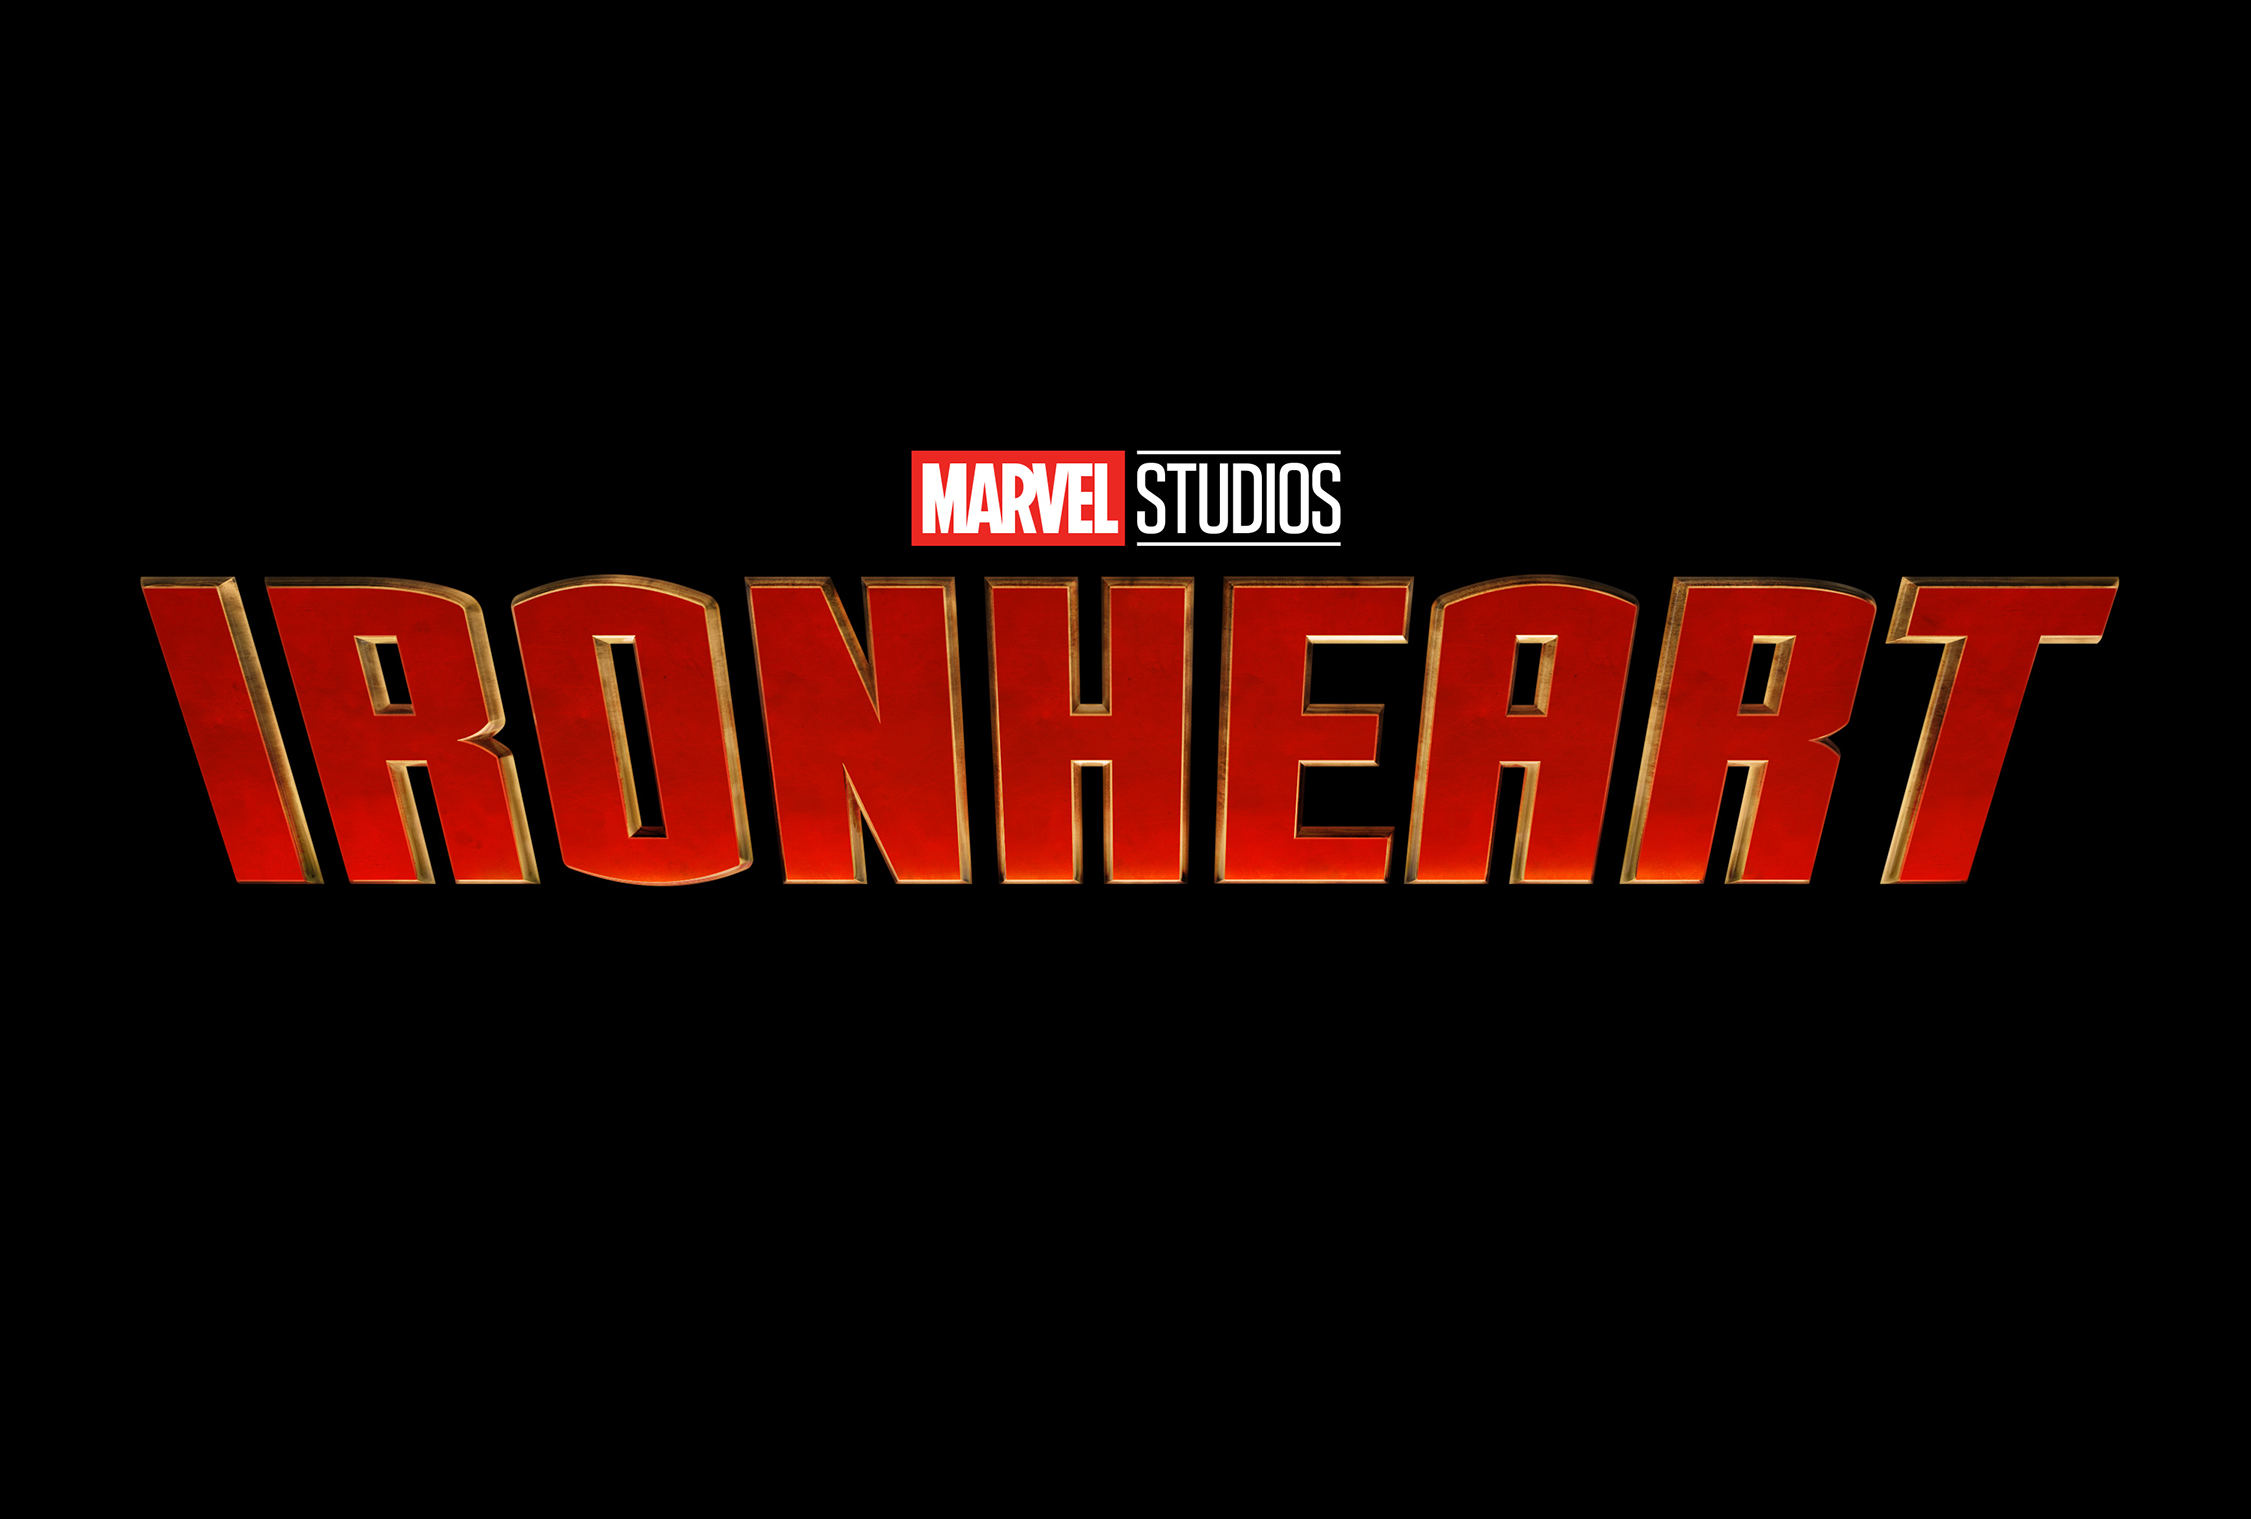 Ironheart casts Rashida “Sheedz” Olayiwola in undisclosed role within the upcoming Marvel Disney+ show. Read on for more details.